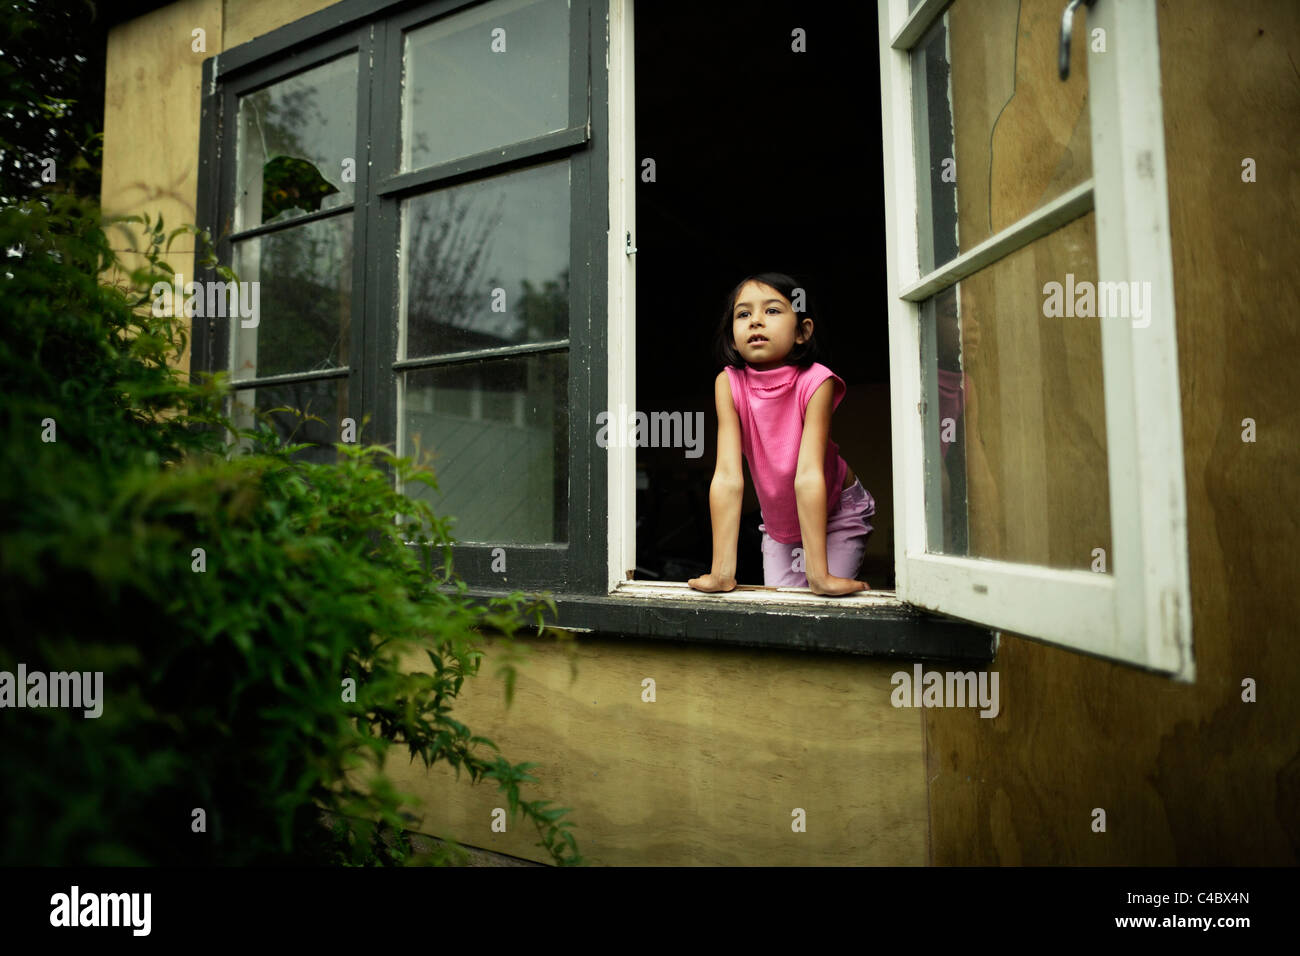 Girl looking out shed window Stock Photo